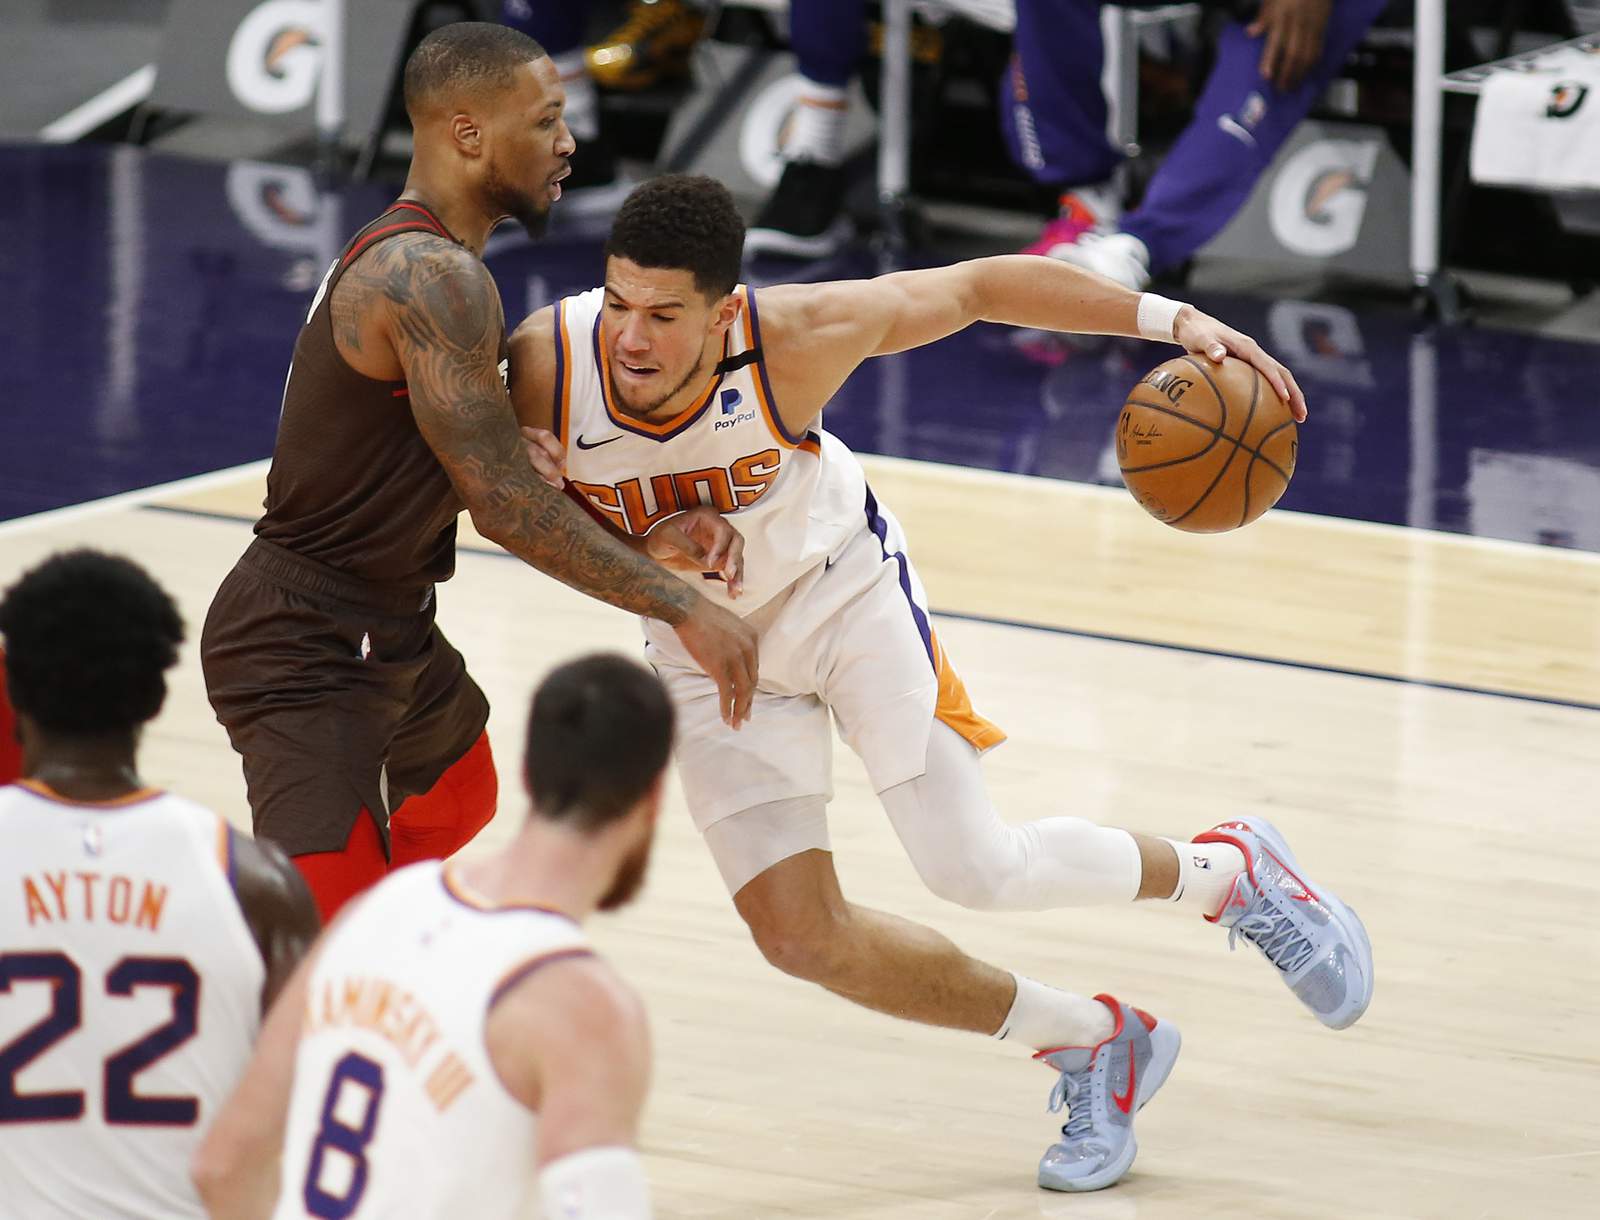 Suns' Booker replaces Lakers' Davis in NBA All-Star Game